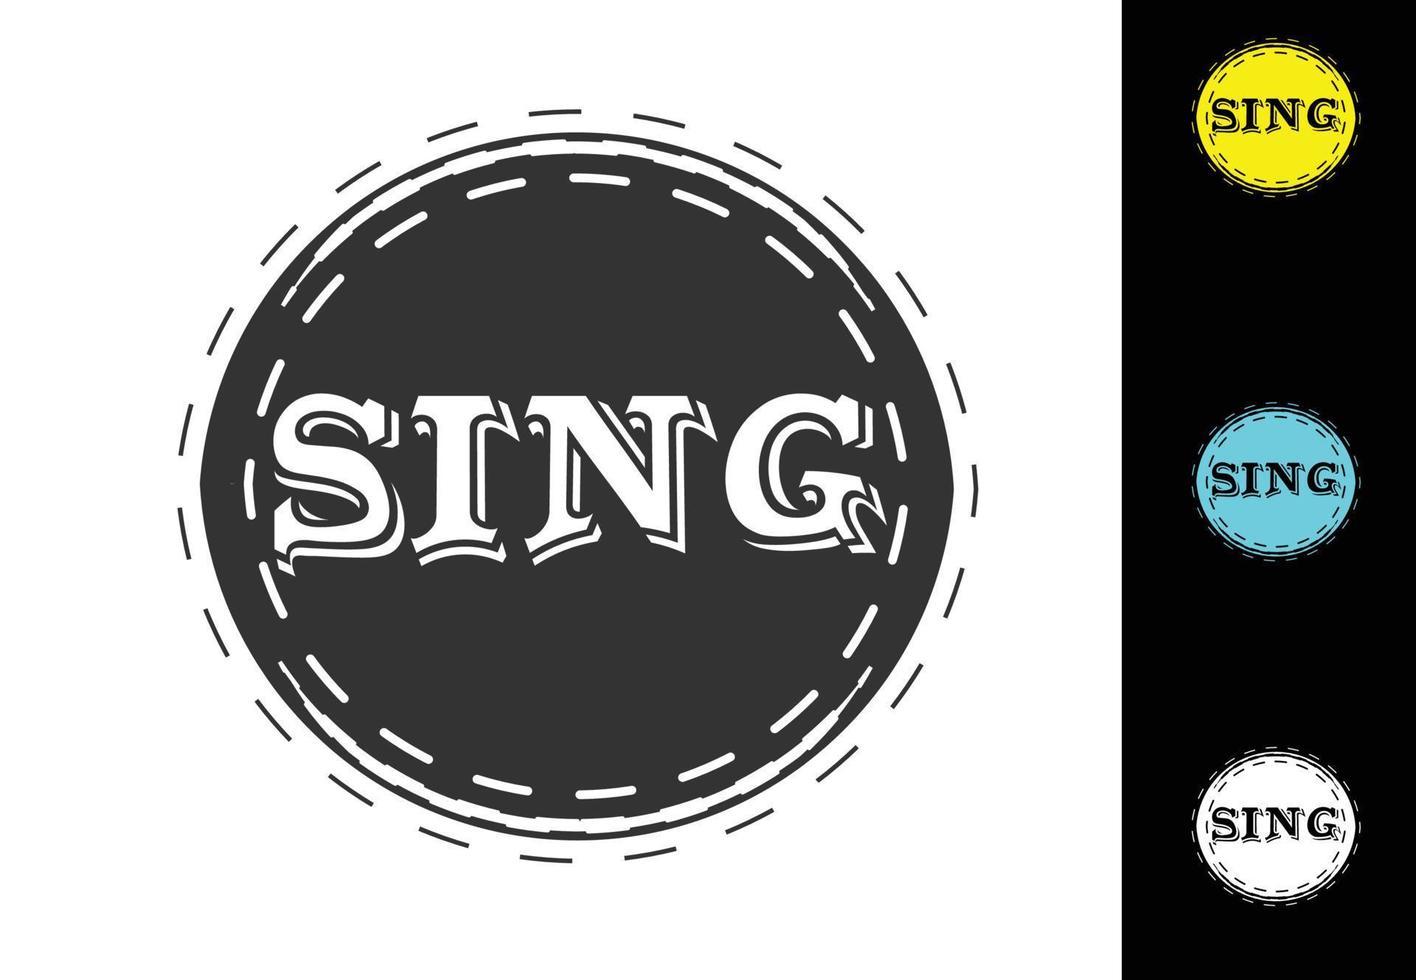 SING letter new logo and icon design template vector